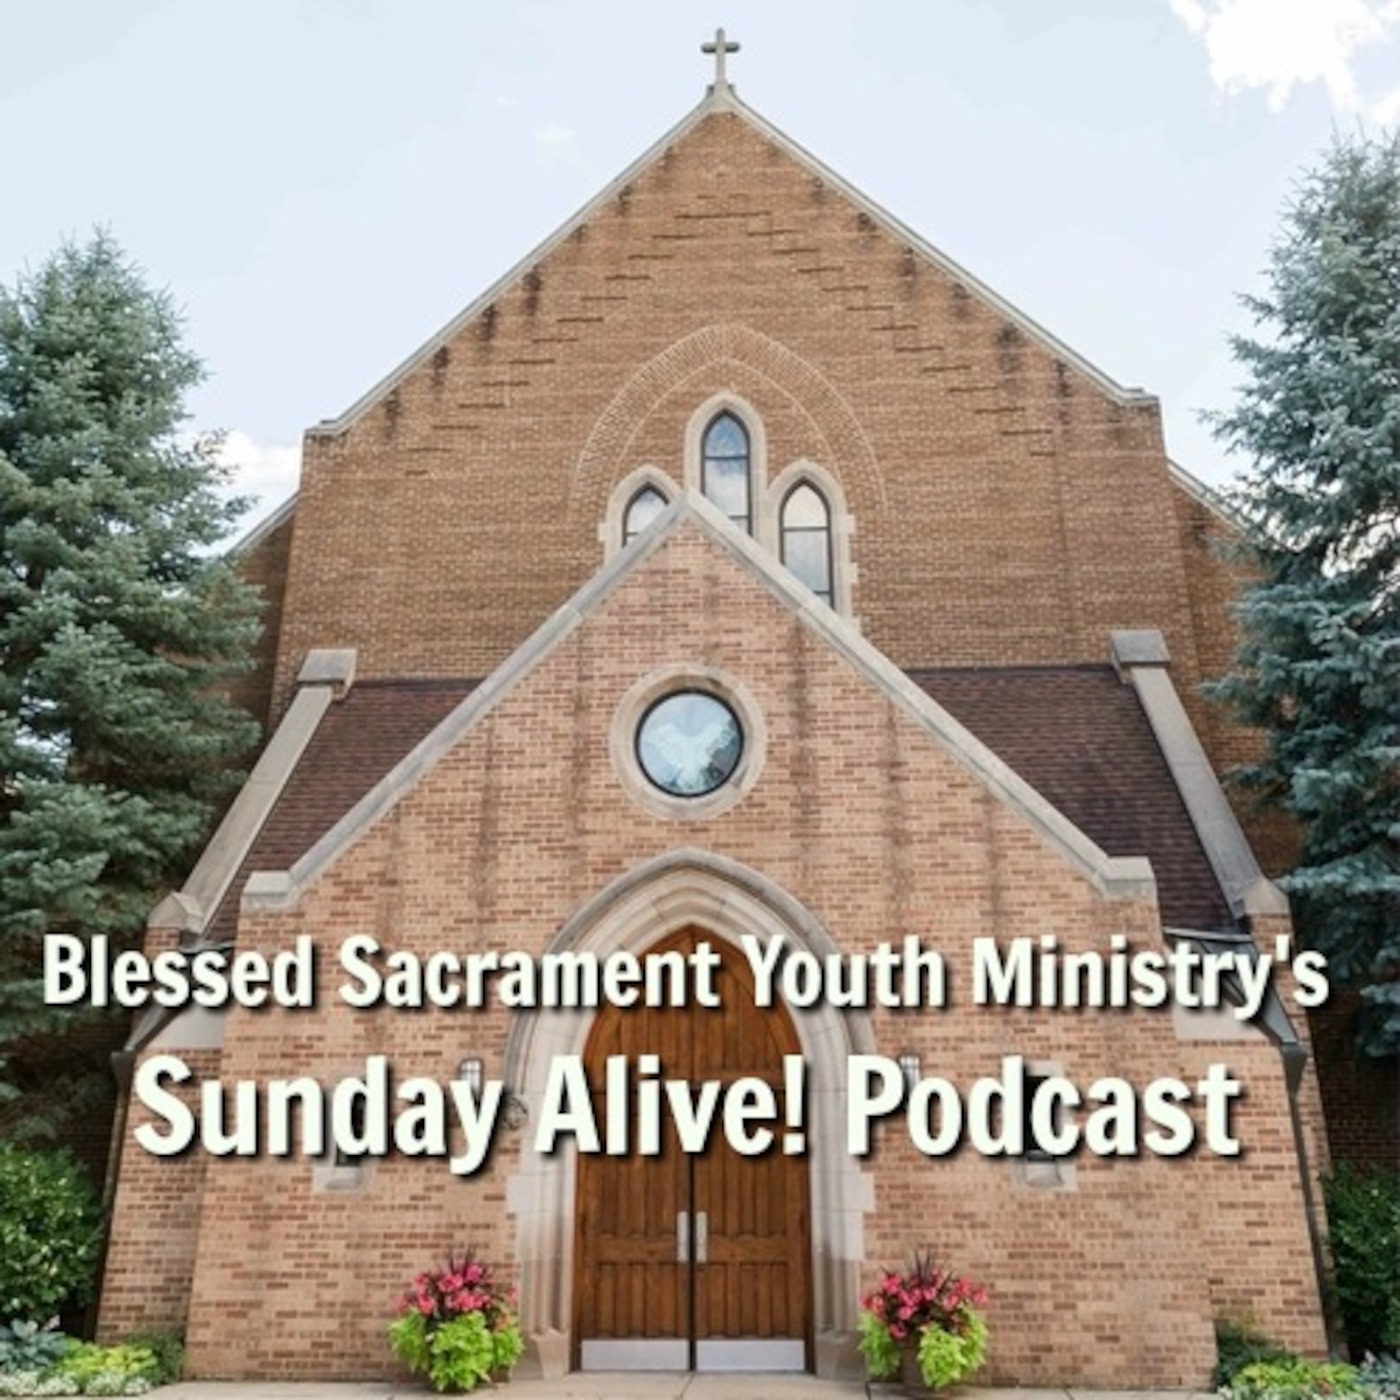 The Sunday Alive Podcast - Sunday, December 15, 2019 - the Third Sunday of Advent